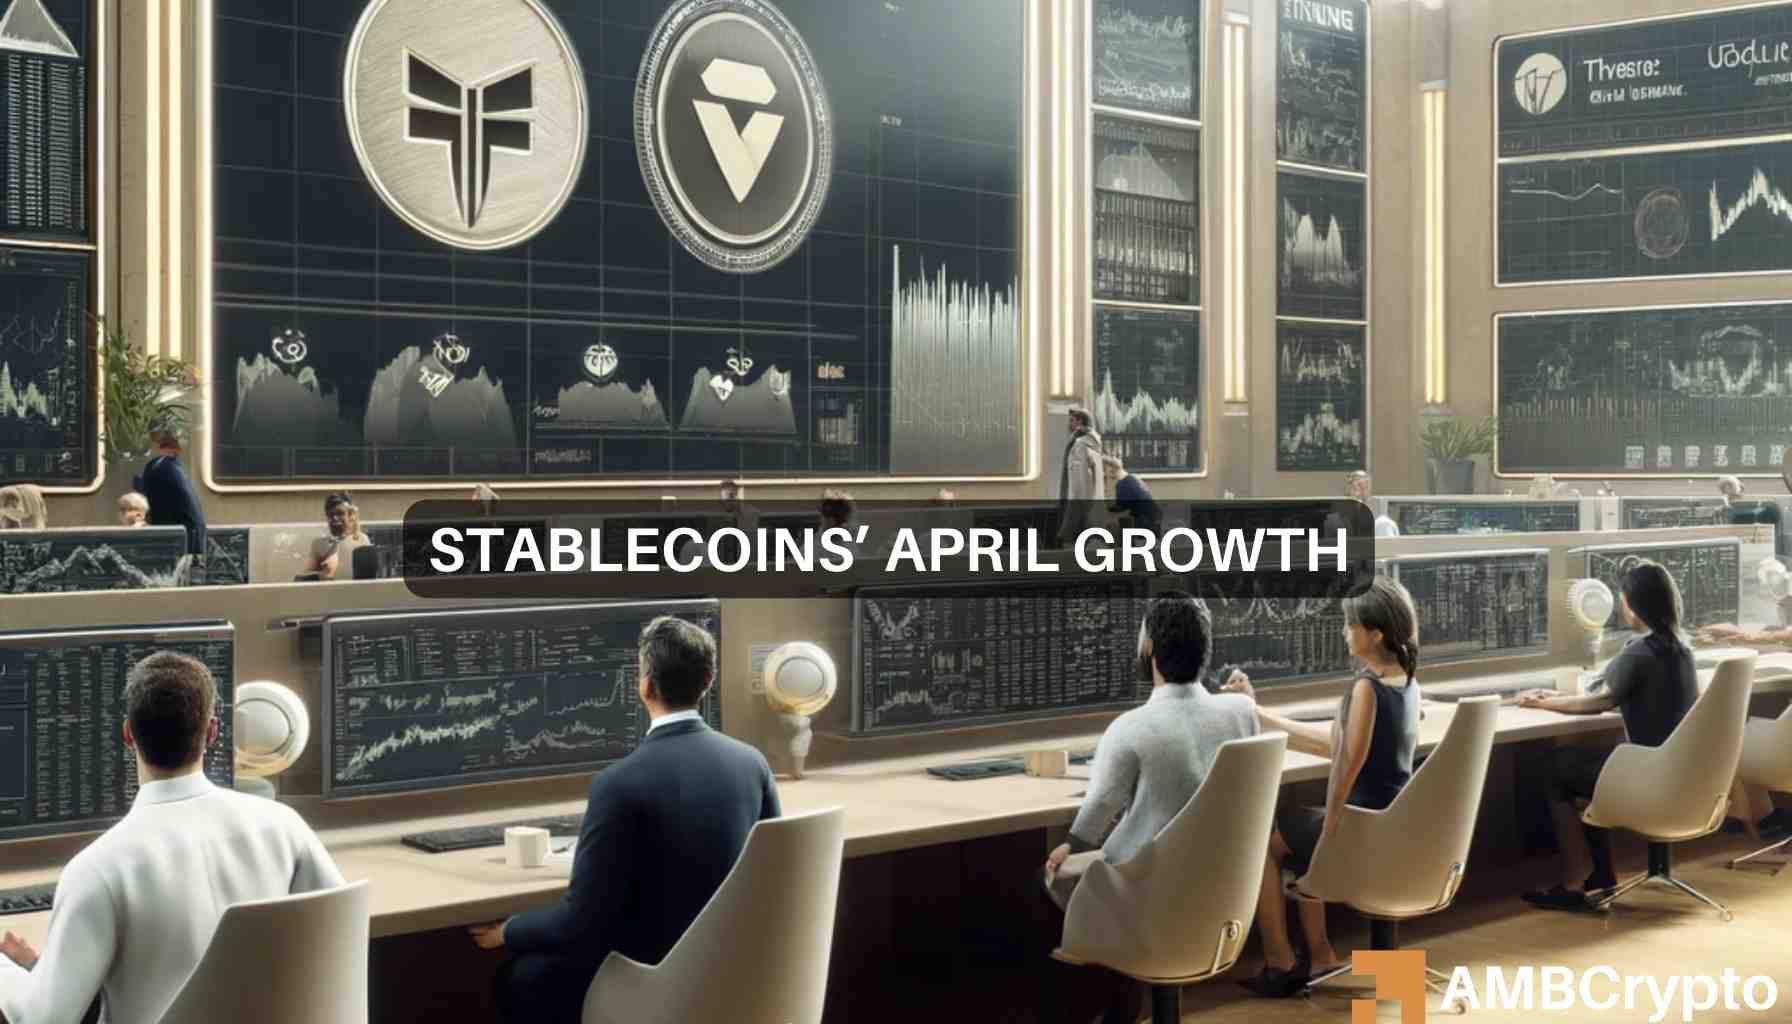 Stablecoins’ $158B high in April: Here’s how USDT, USDC played a part